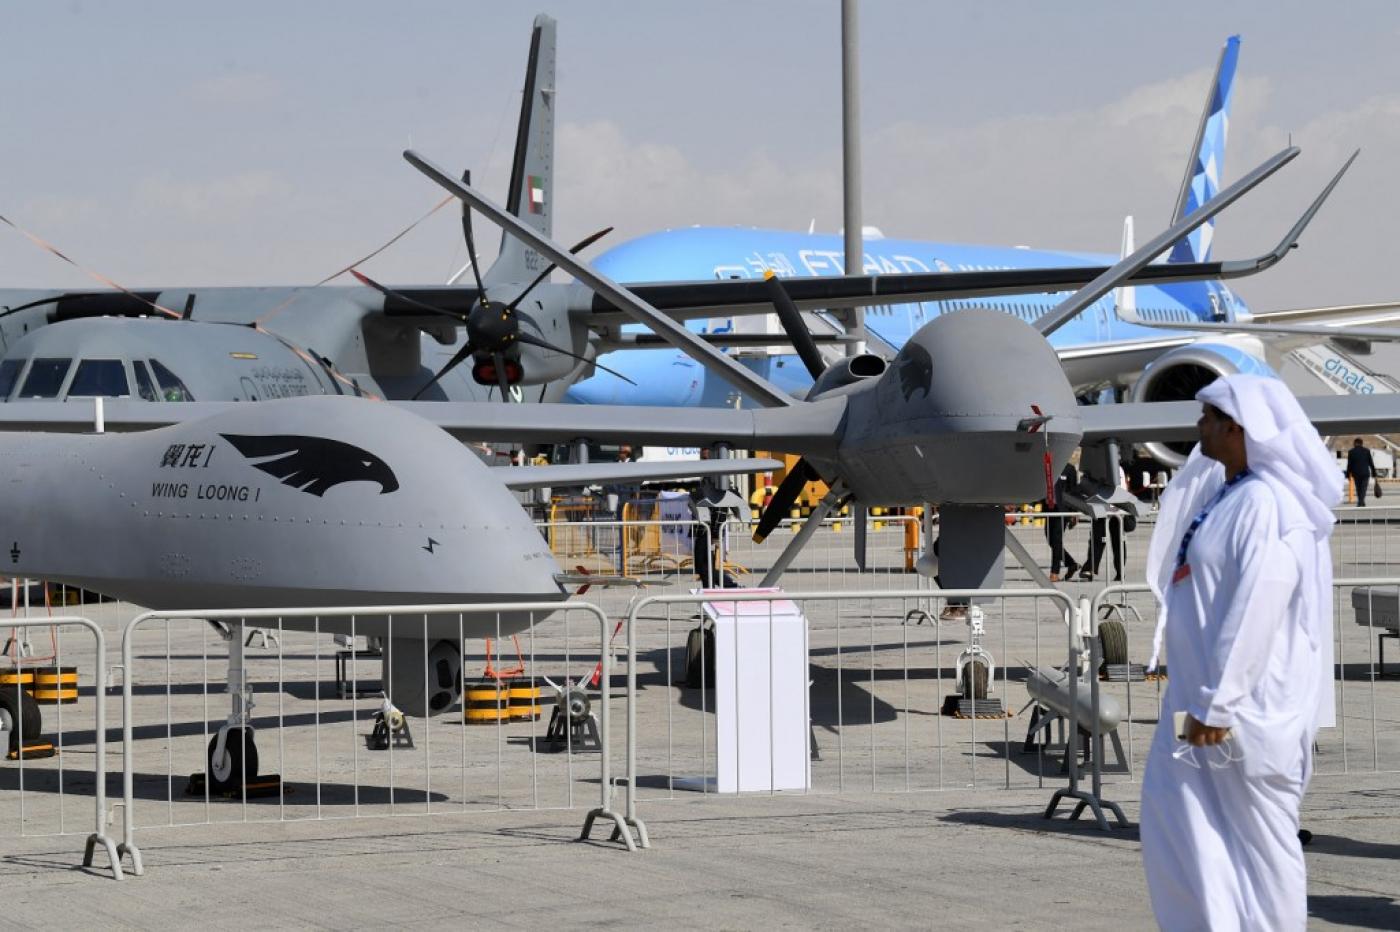 A Chinese-made Wing Loong II drone on display at an airshow in Dubai